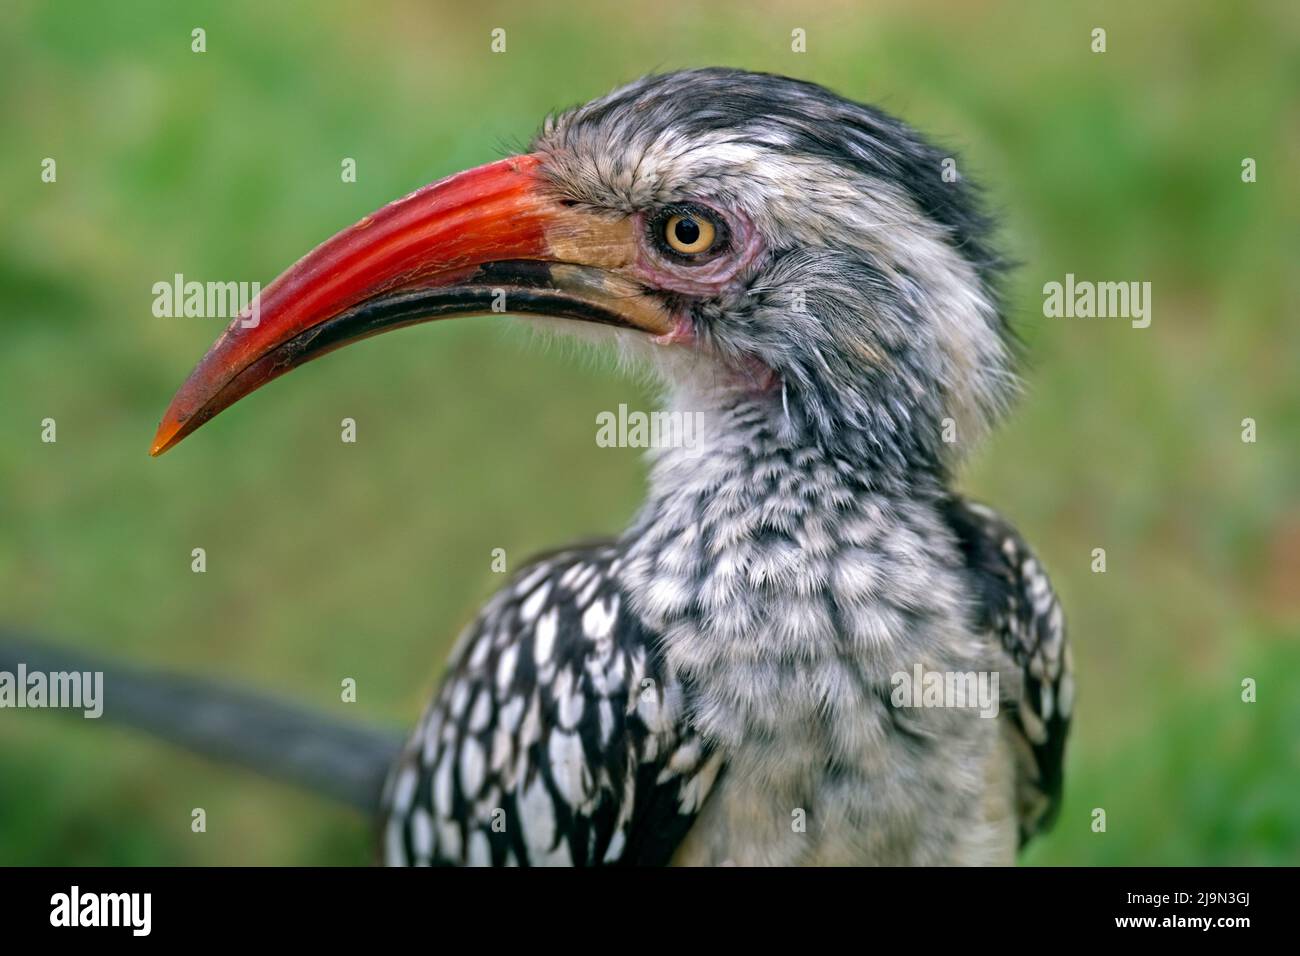 Northern red-billed hornbill (Tockus erythrorhynchus) in the Kruger National Park, Mpumalanga, South Africa Stock Photo